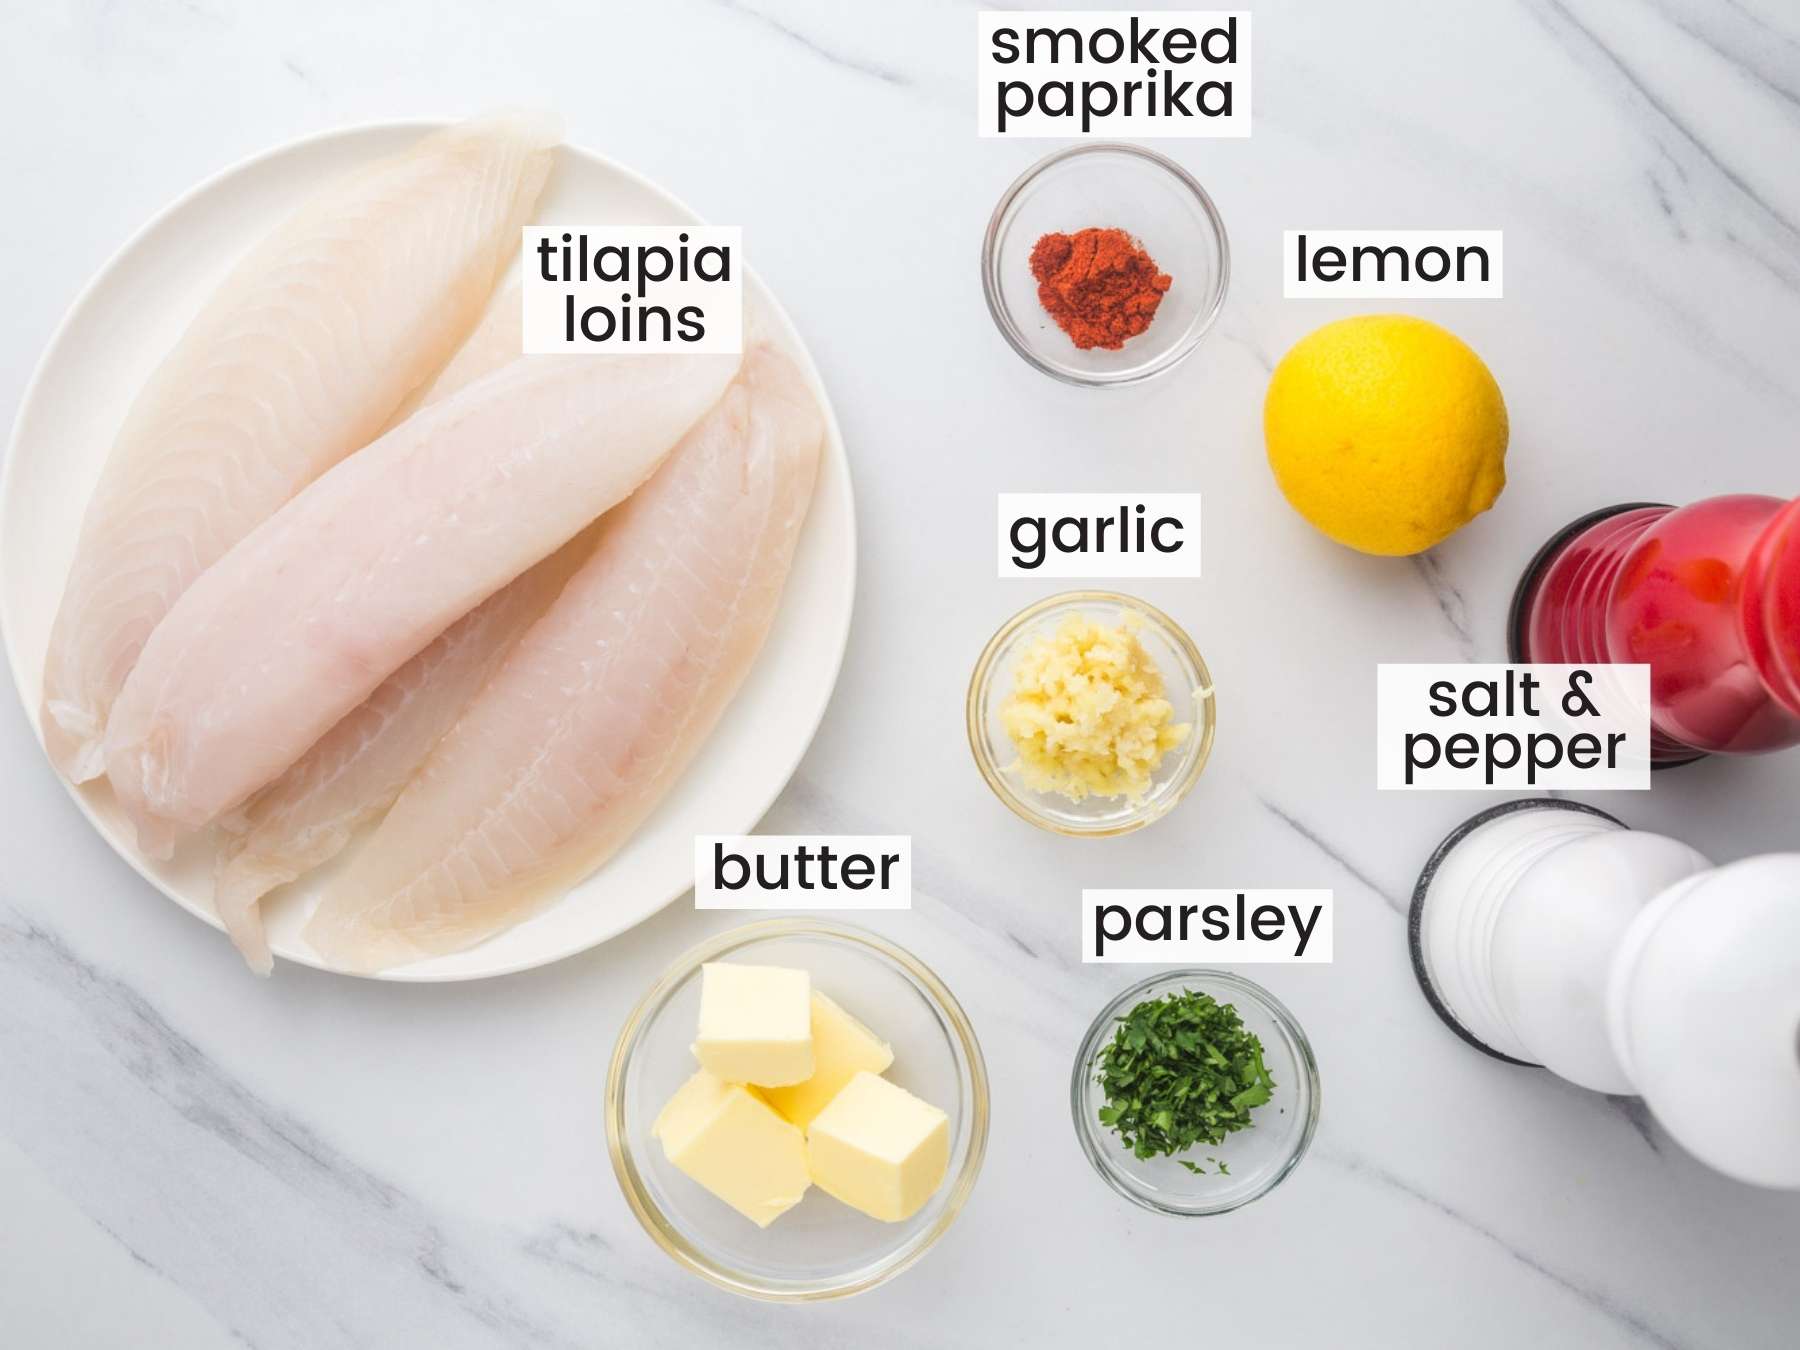 The ingredients for making baked tilapia, on a marble countertop, viewed from above